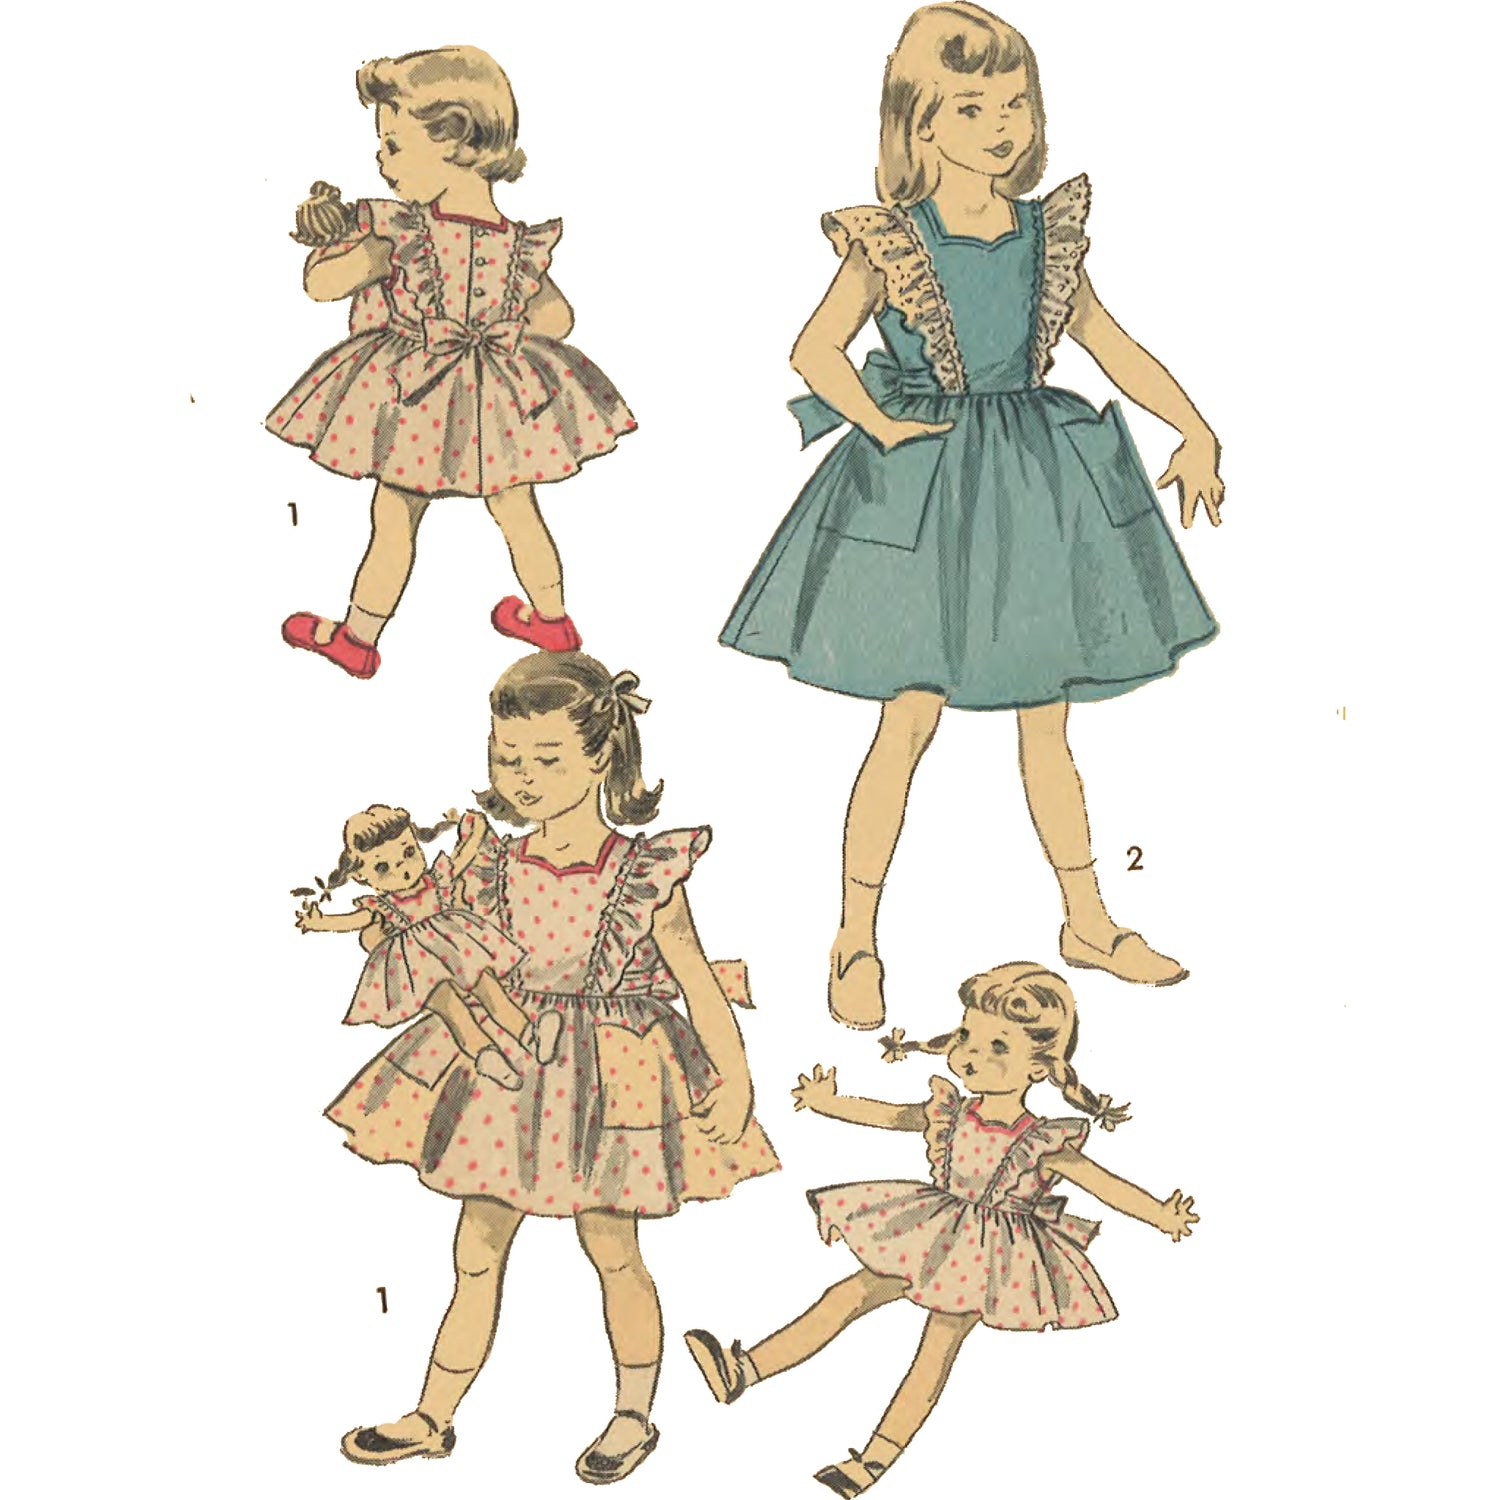 Image of 3 girls in 'Alice in Wonderland' style dresses, plus doll wearing mini version of the same outfit.